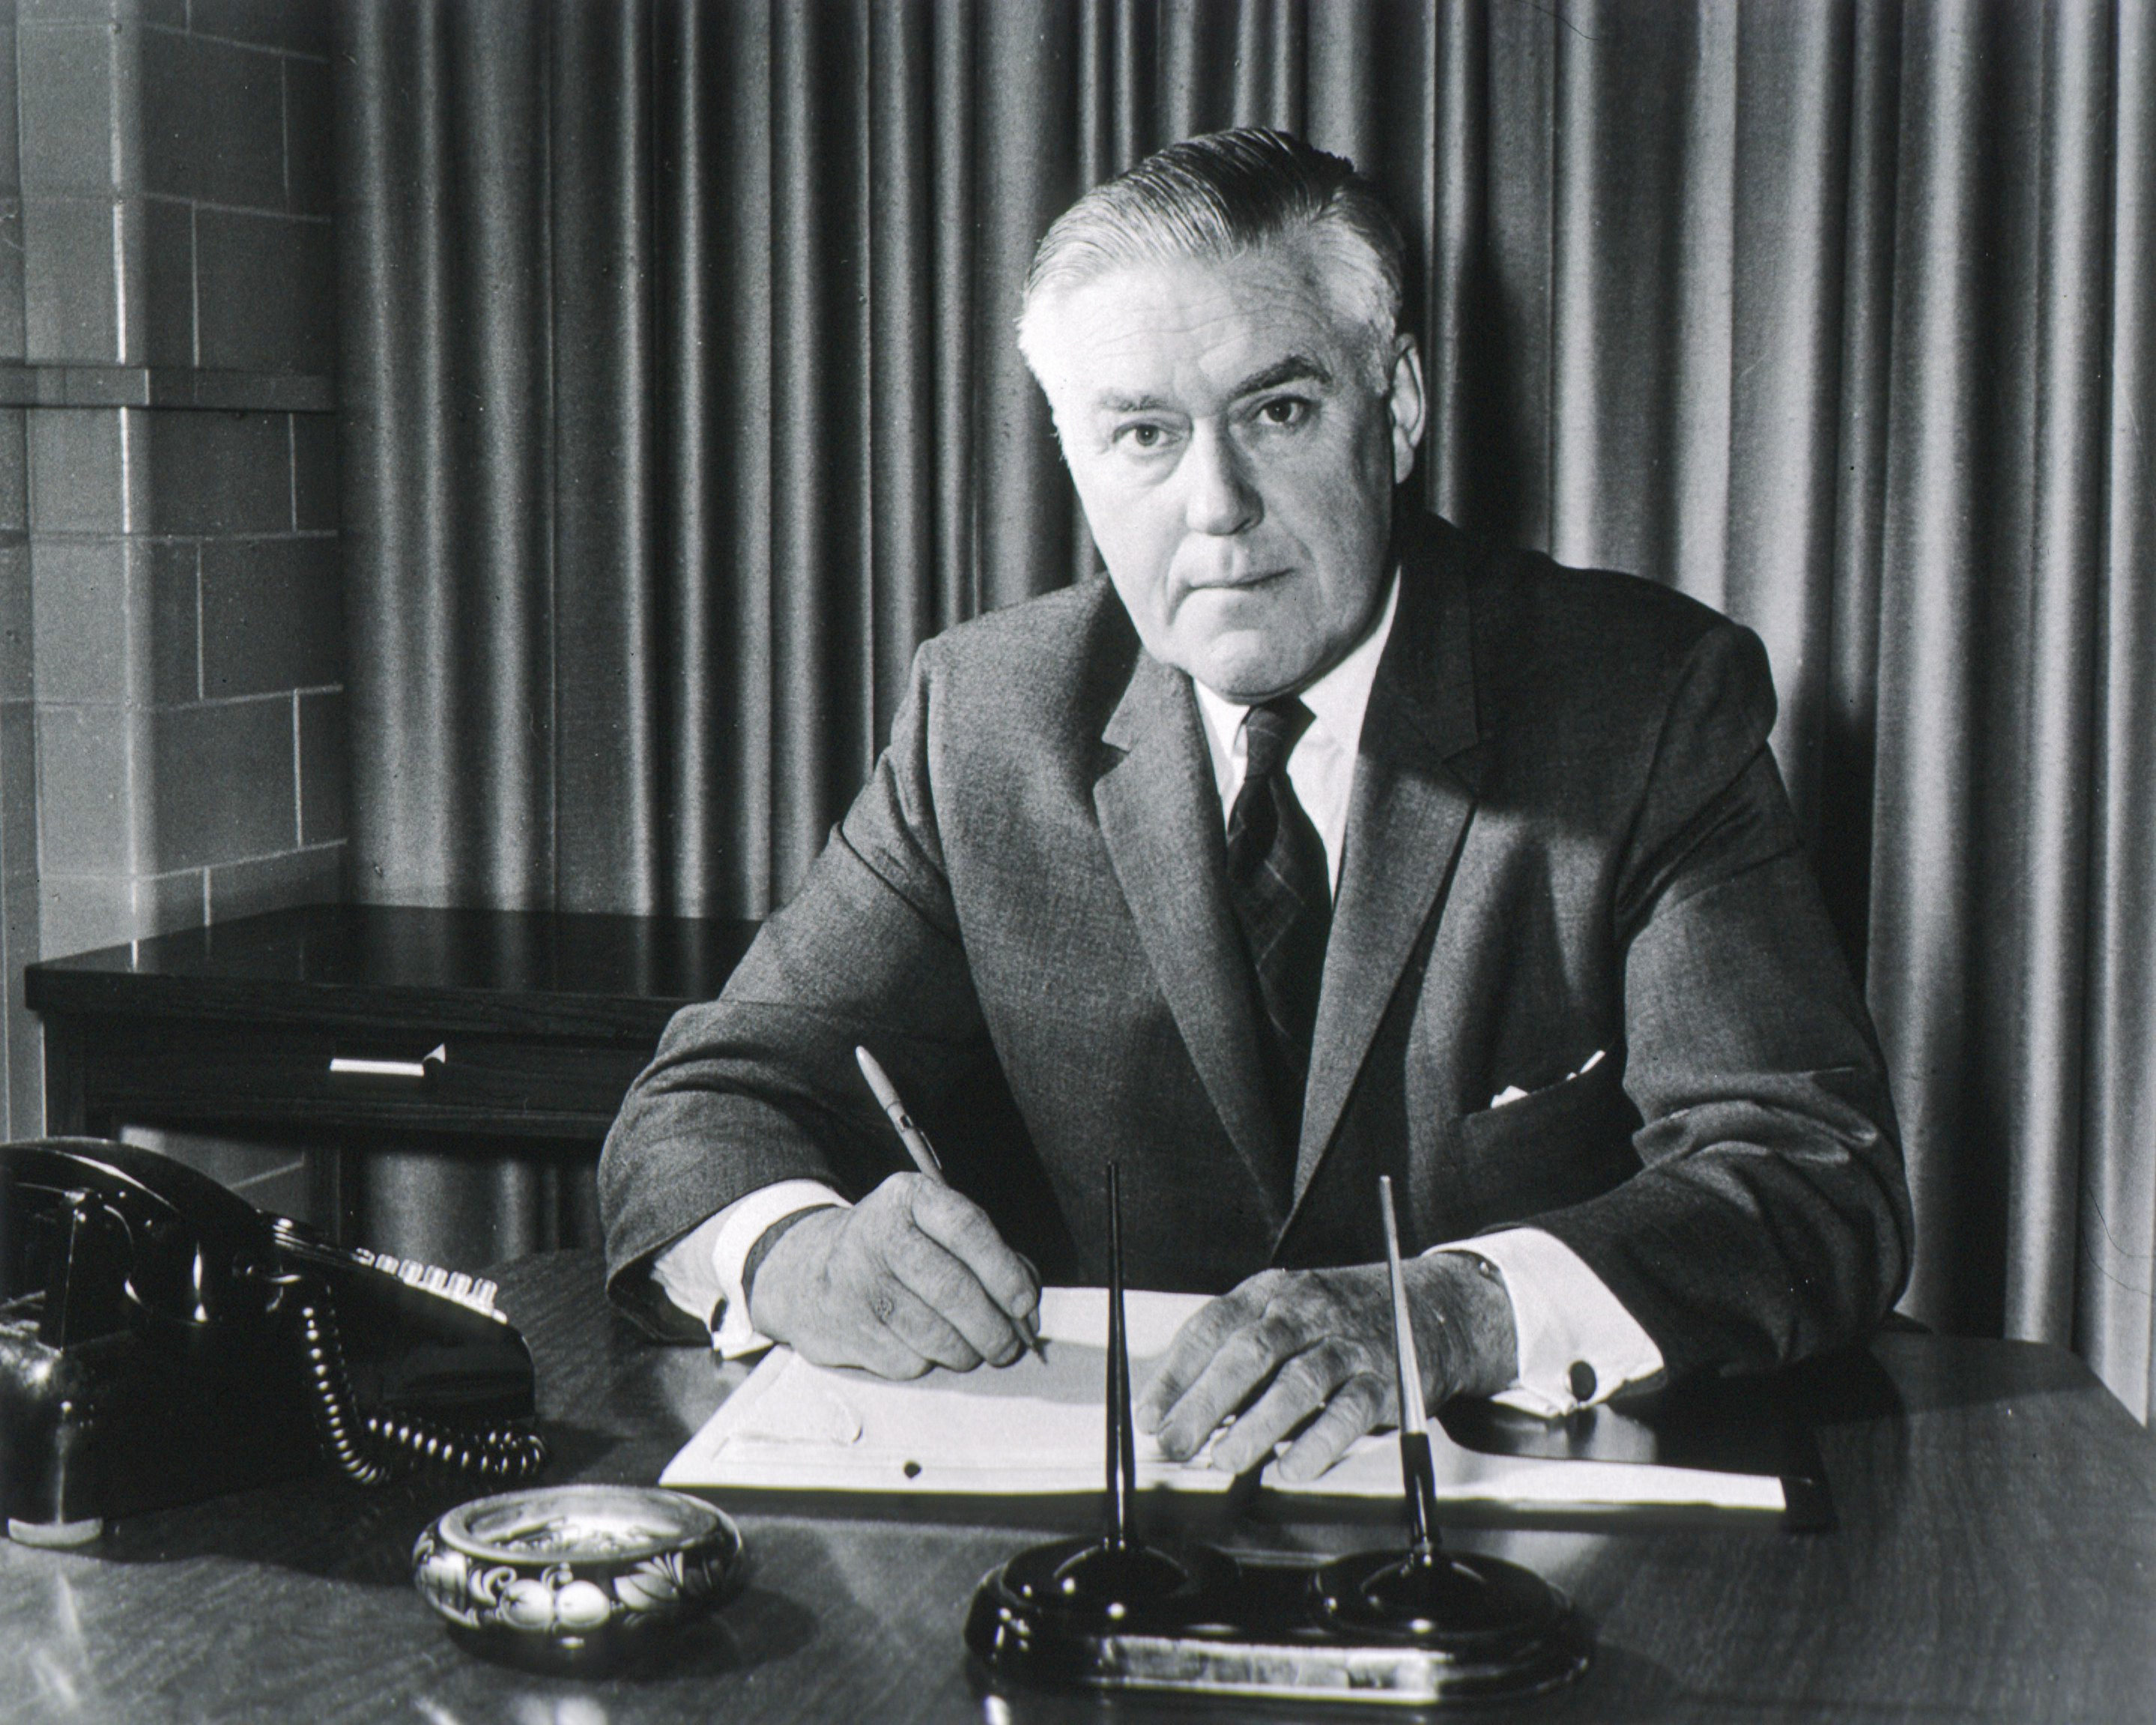 Dr Murray sitting at his desk wearing a suit, writing with a pen